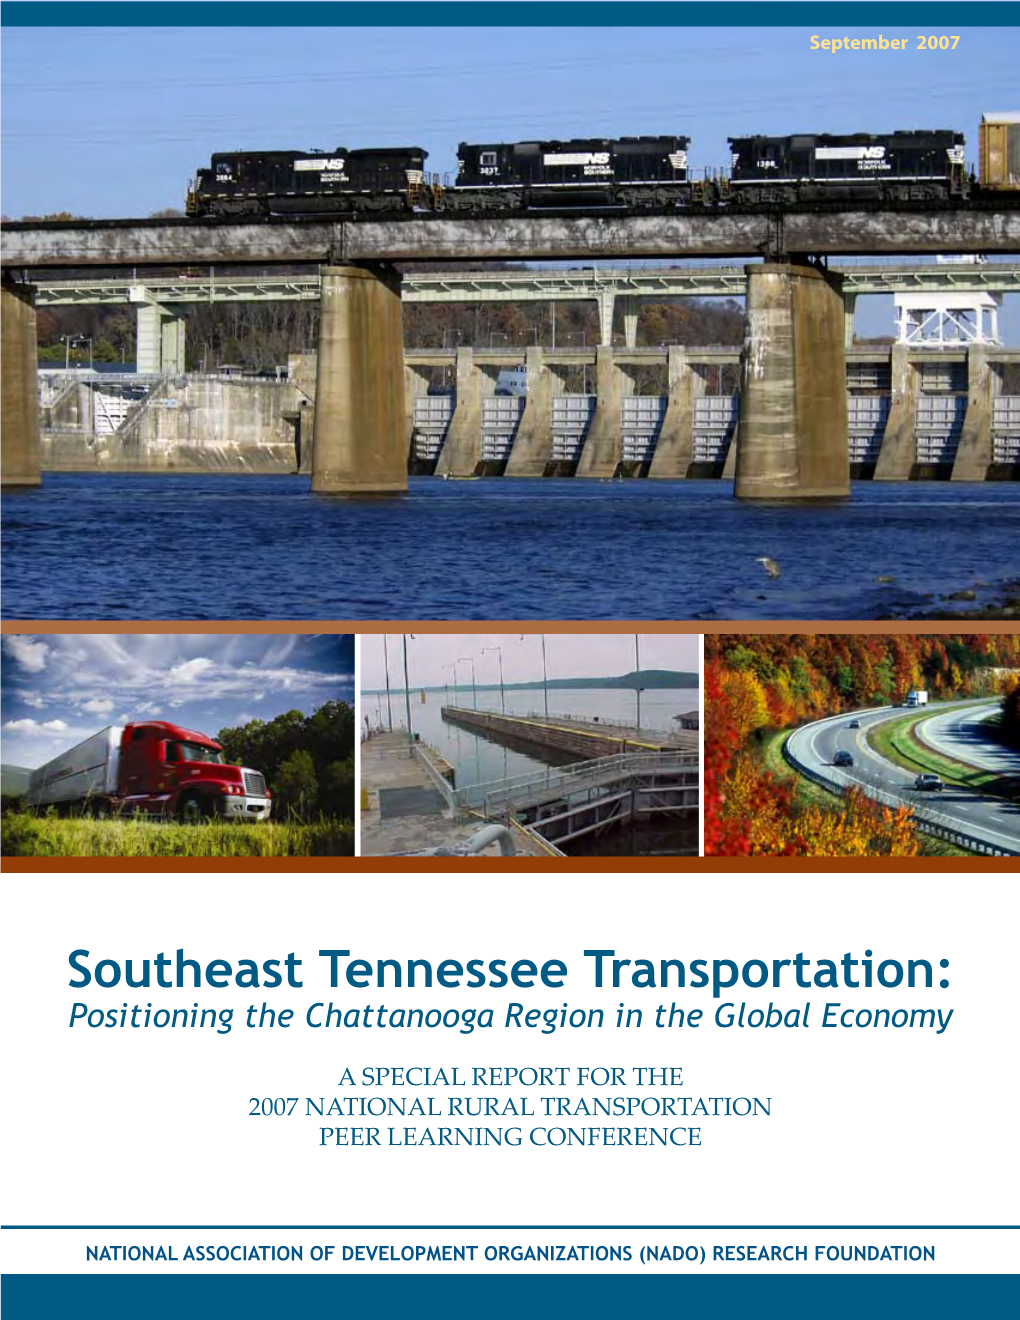 Southeast Tennessee Transportation: Positioning the Chattanooga Region in the Global Economy